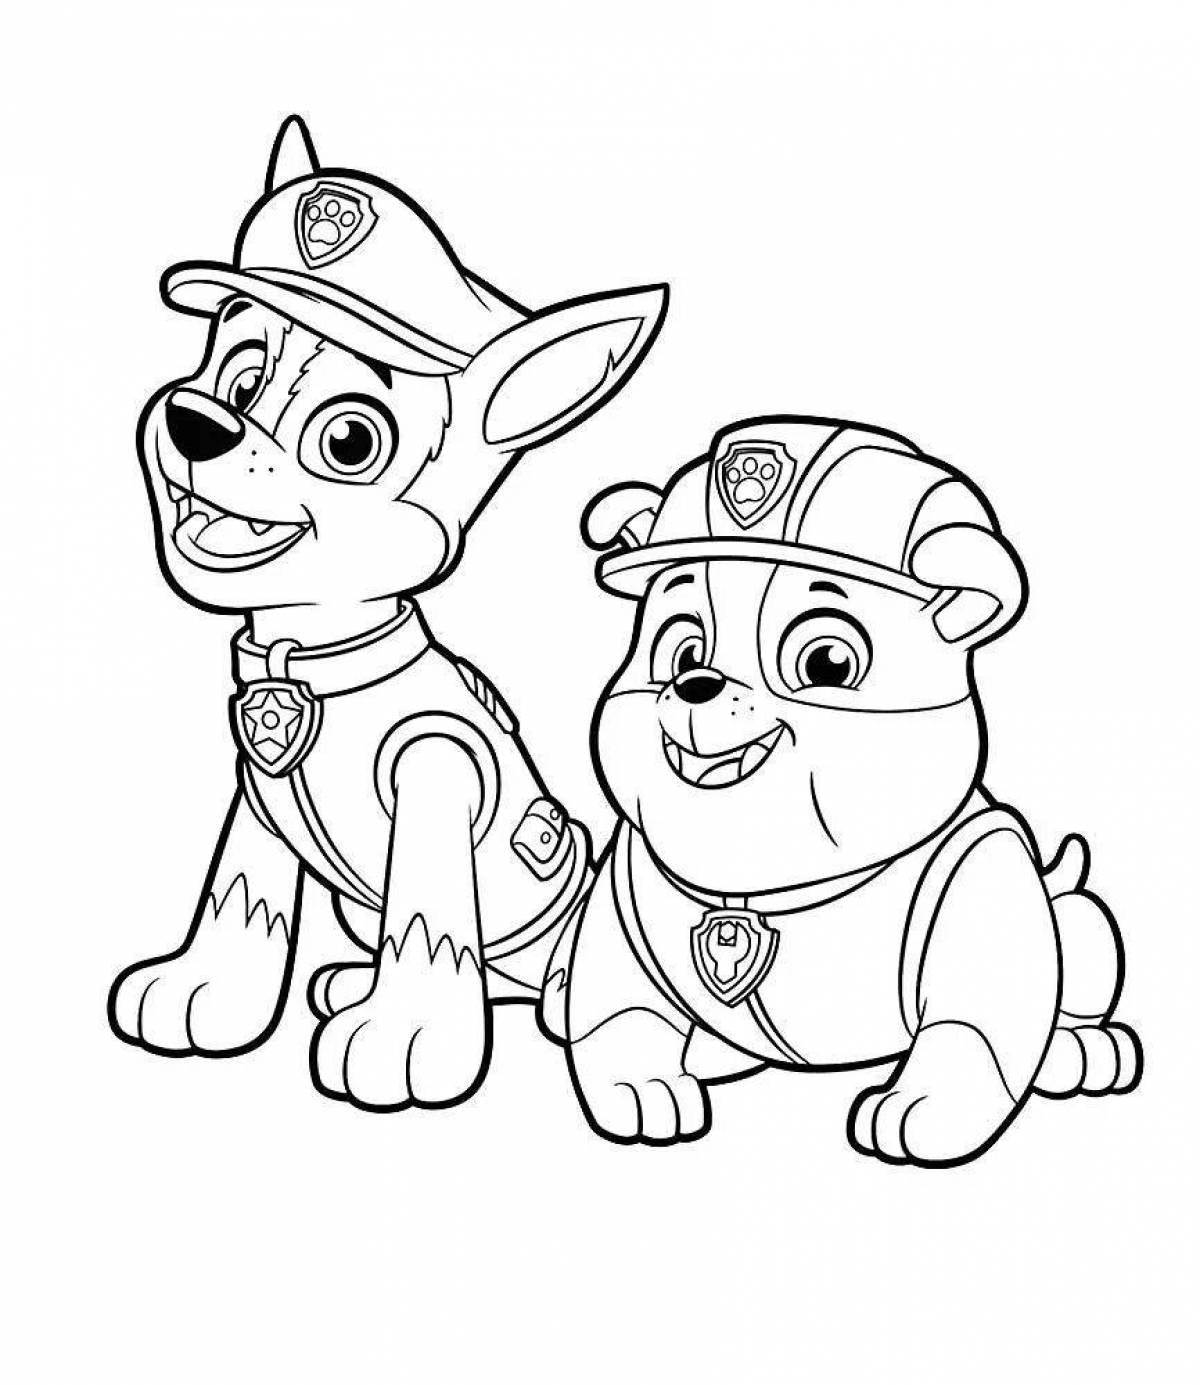 Adorable Paw Patrol coloring book for 4-5 year olds